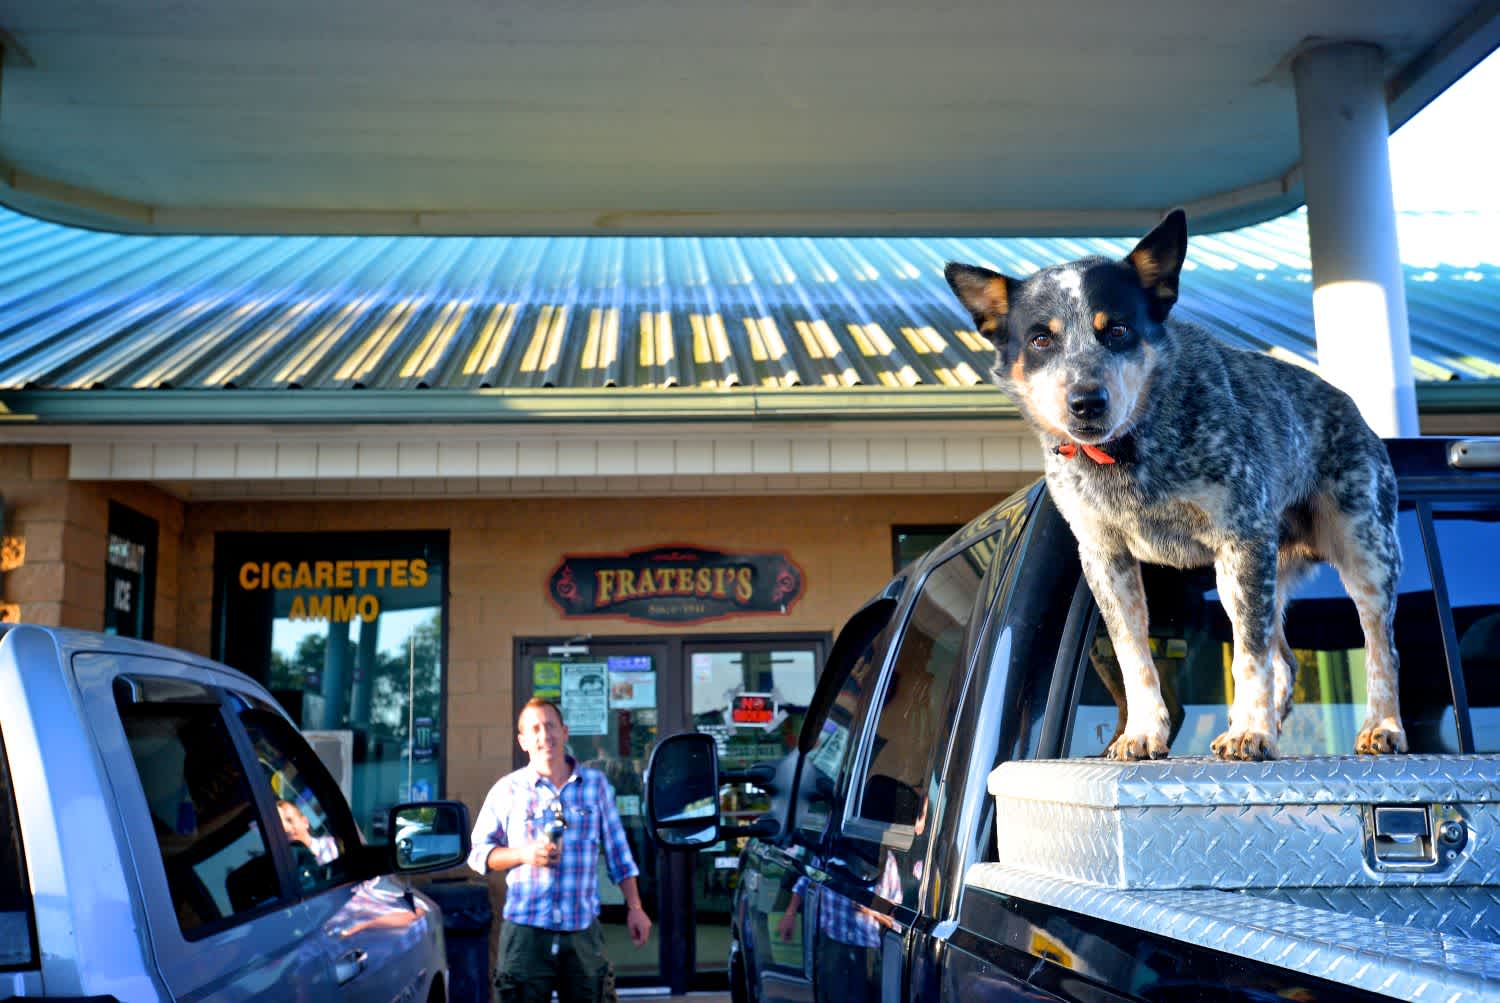 A Blue Heeler dog stands on a metal box in the back of a truck. The truck is parked in front of a convenience store. A man in a plaid shirt stands in the background.